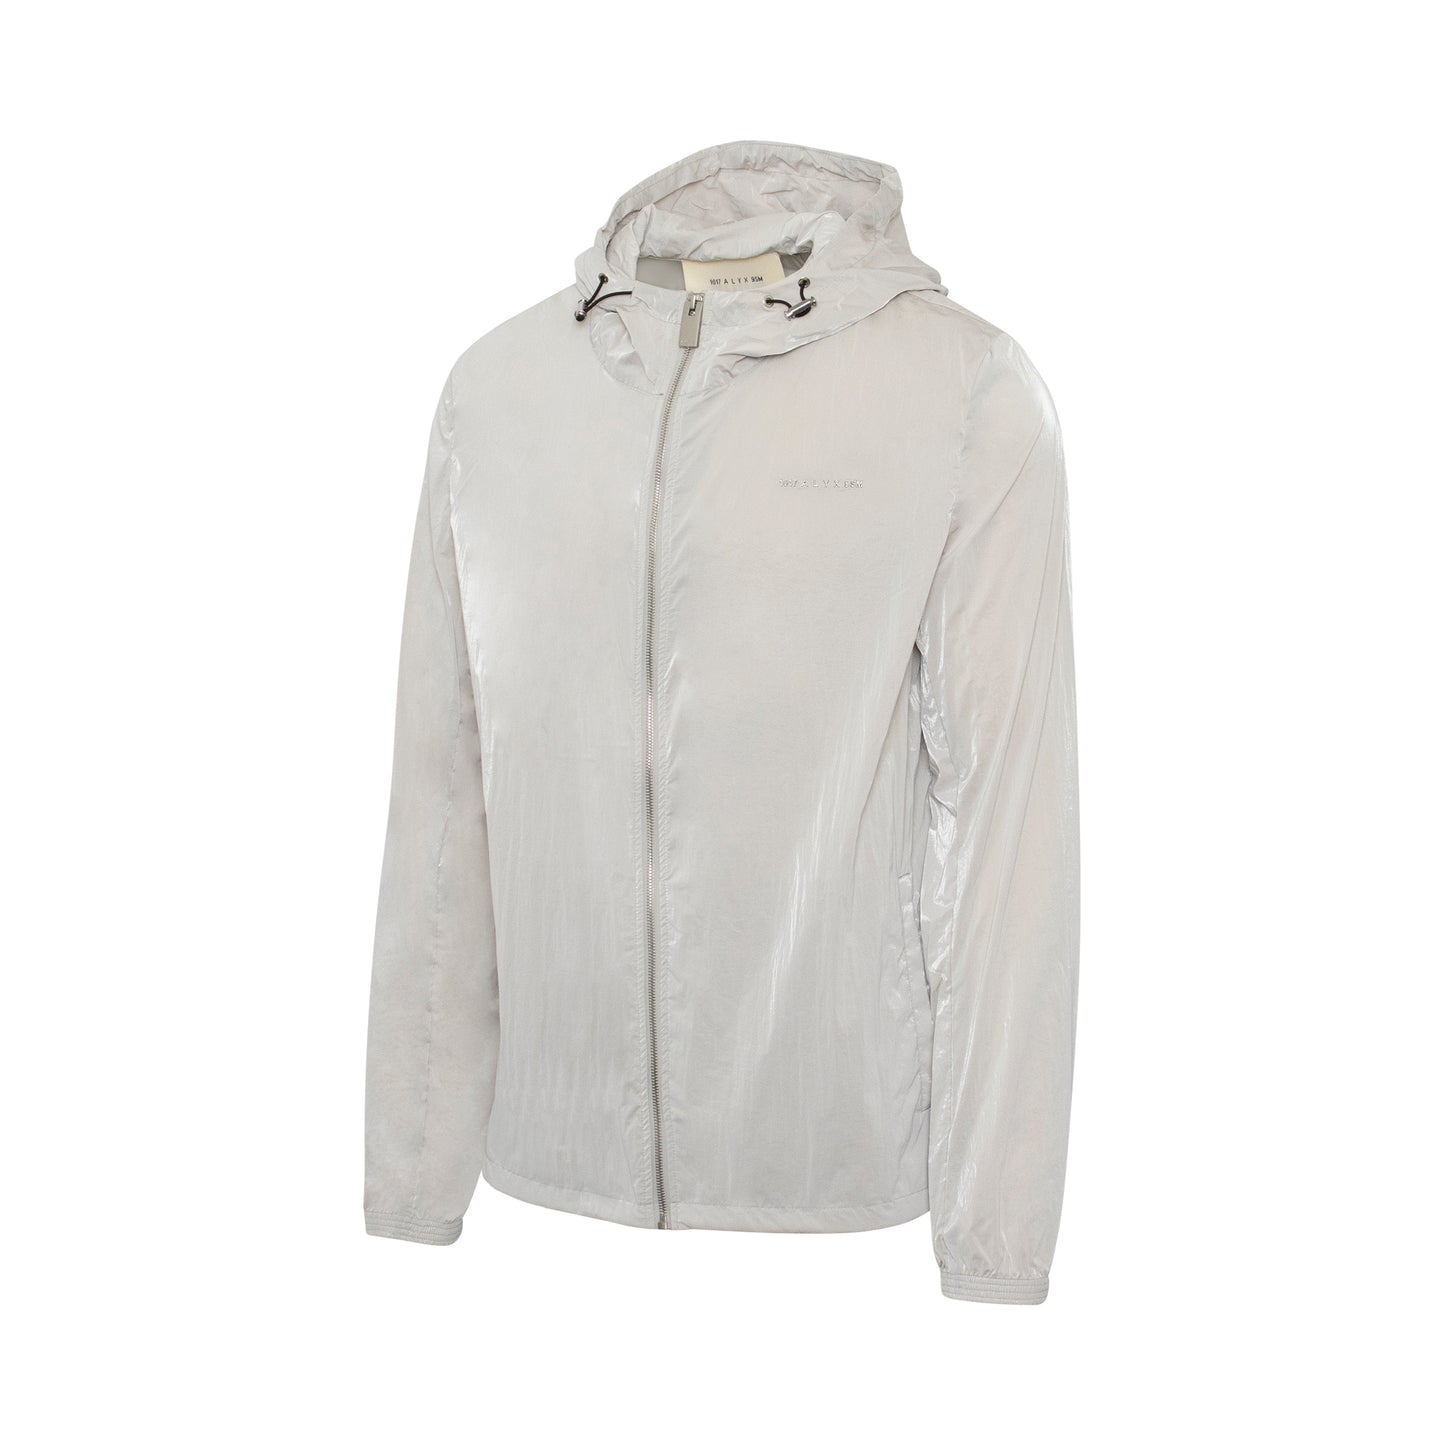 Nightrider Shell Jacket in Stone